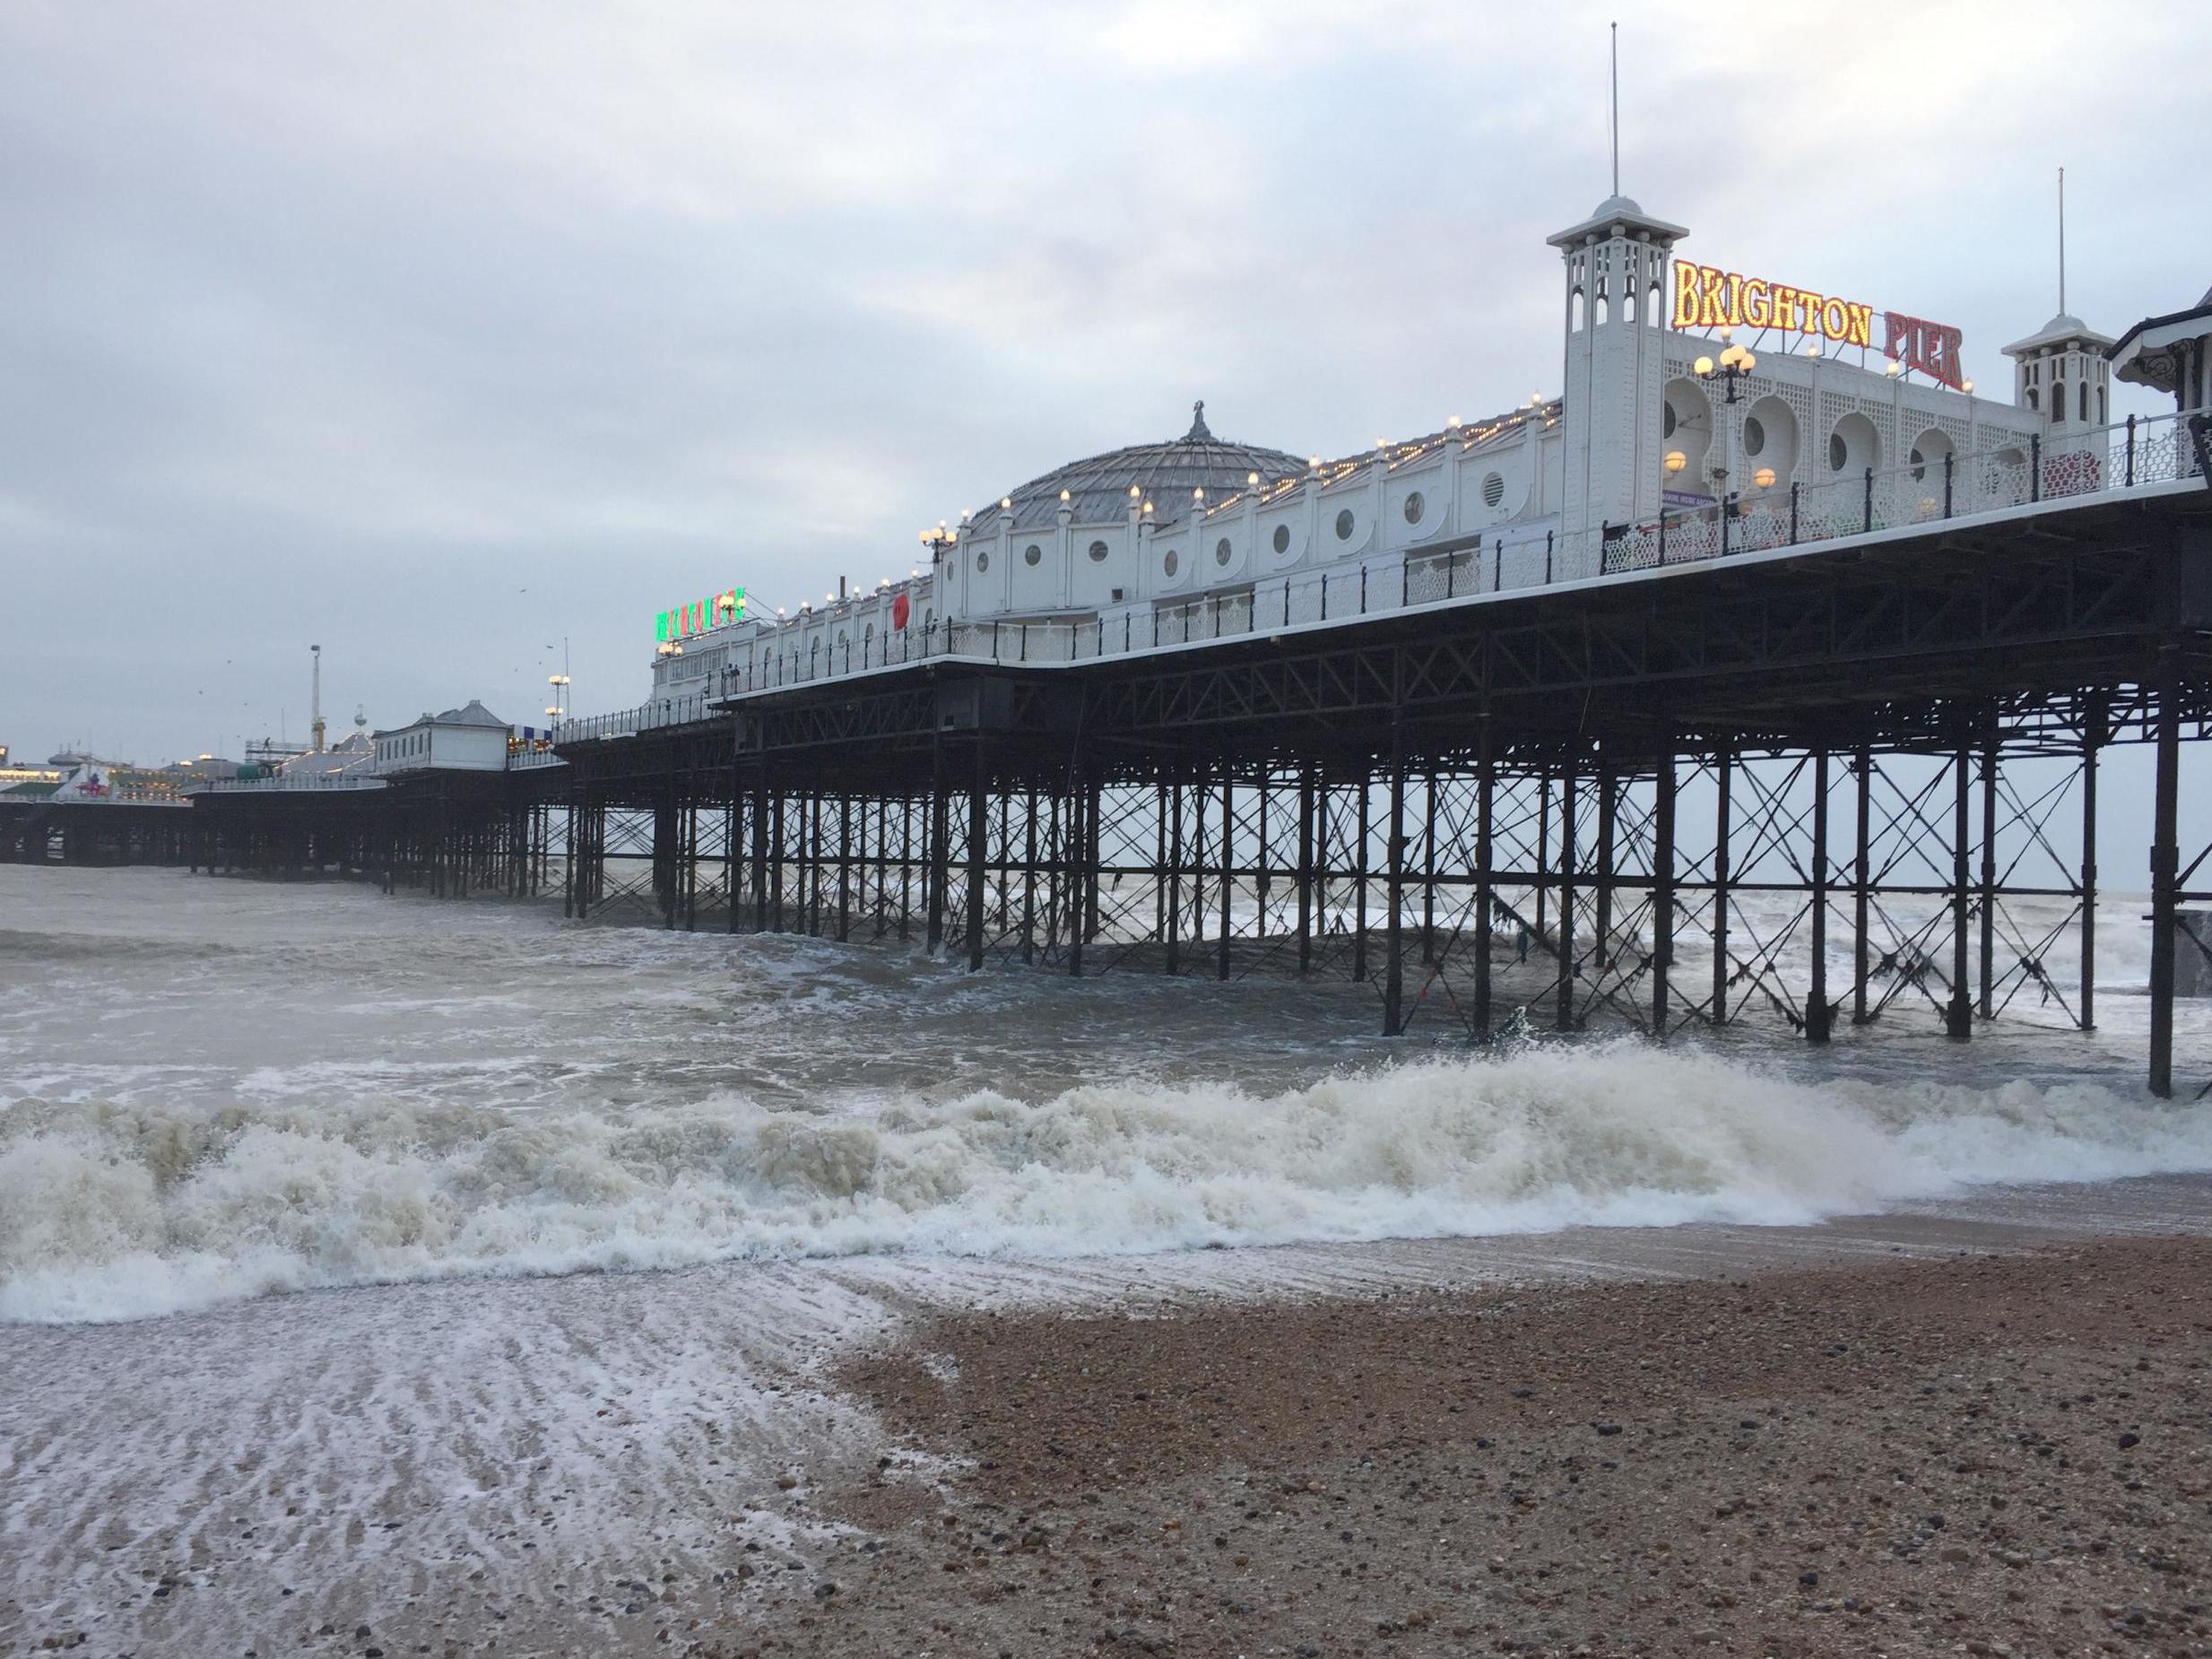 Child, 9, taken into police protection after being 'found beneath Brighton  Pier' in darkness during violent storms, The Independent